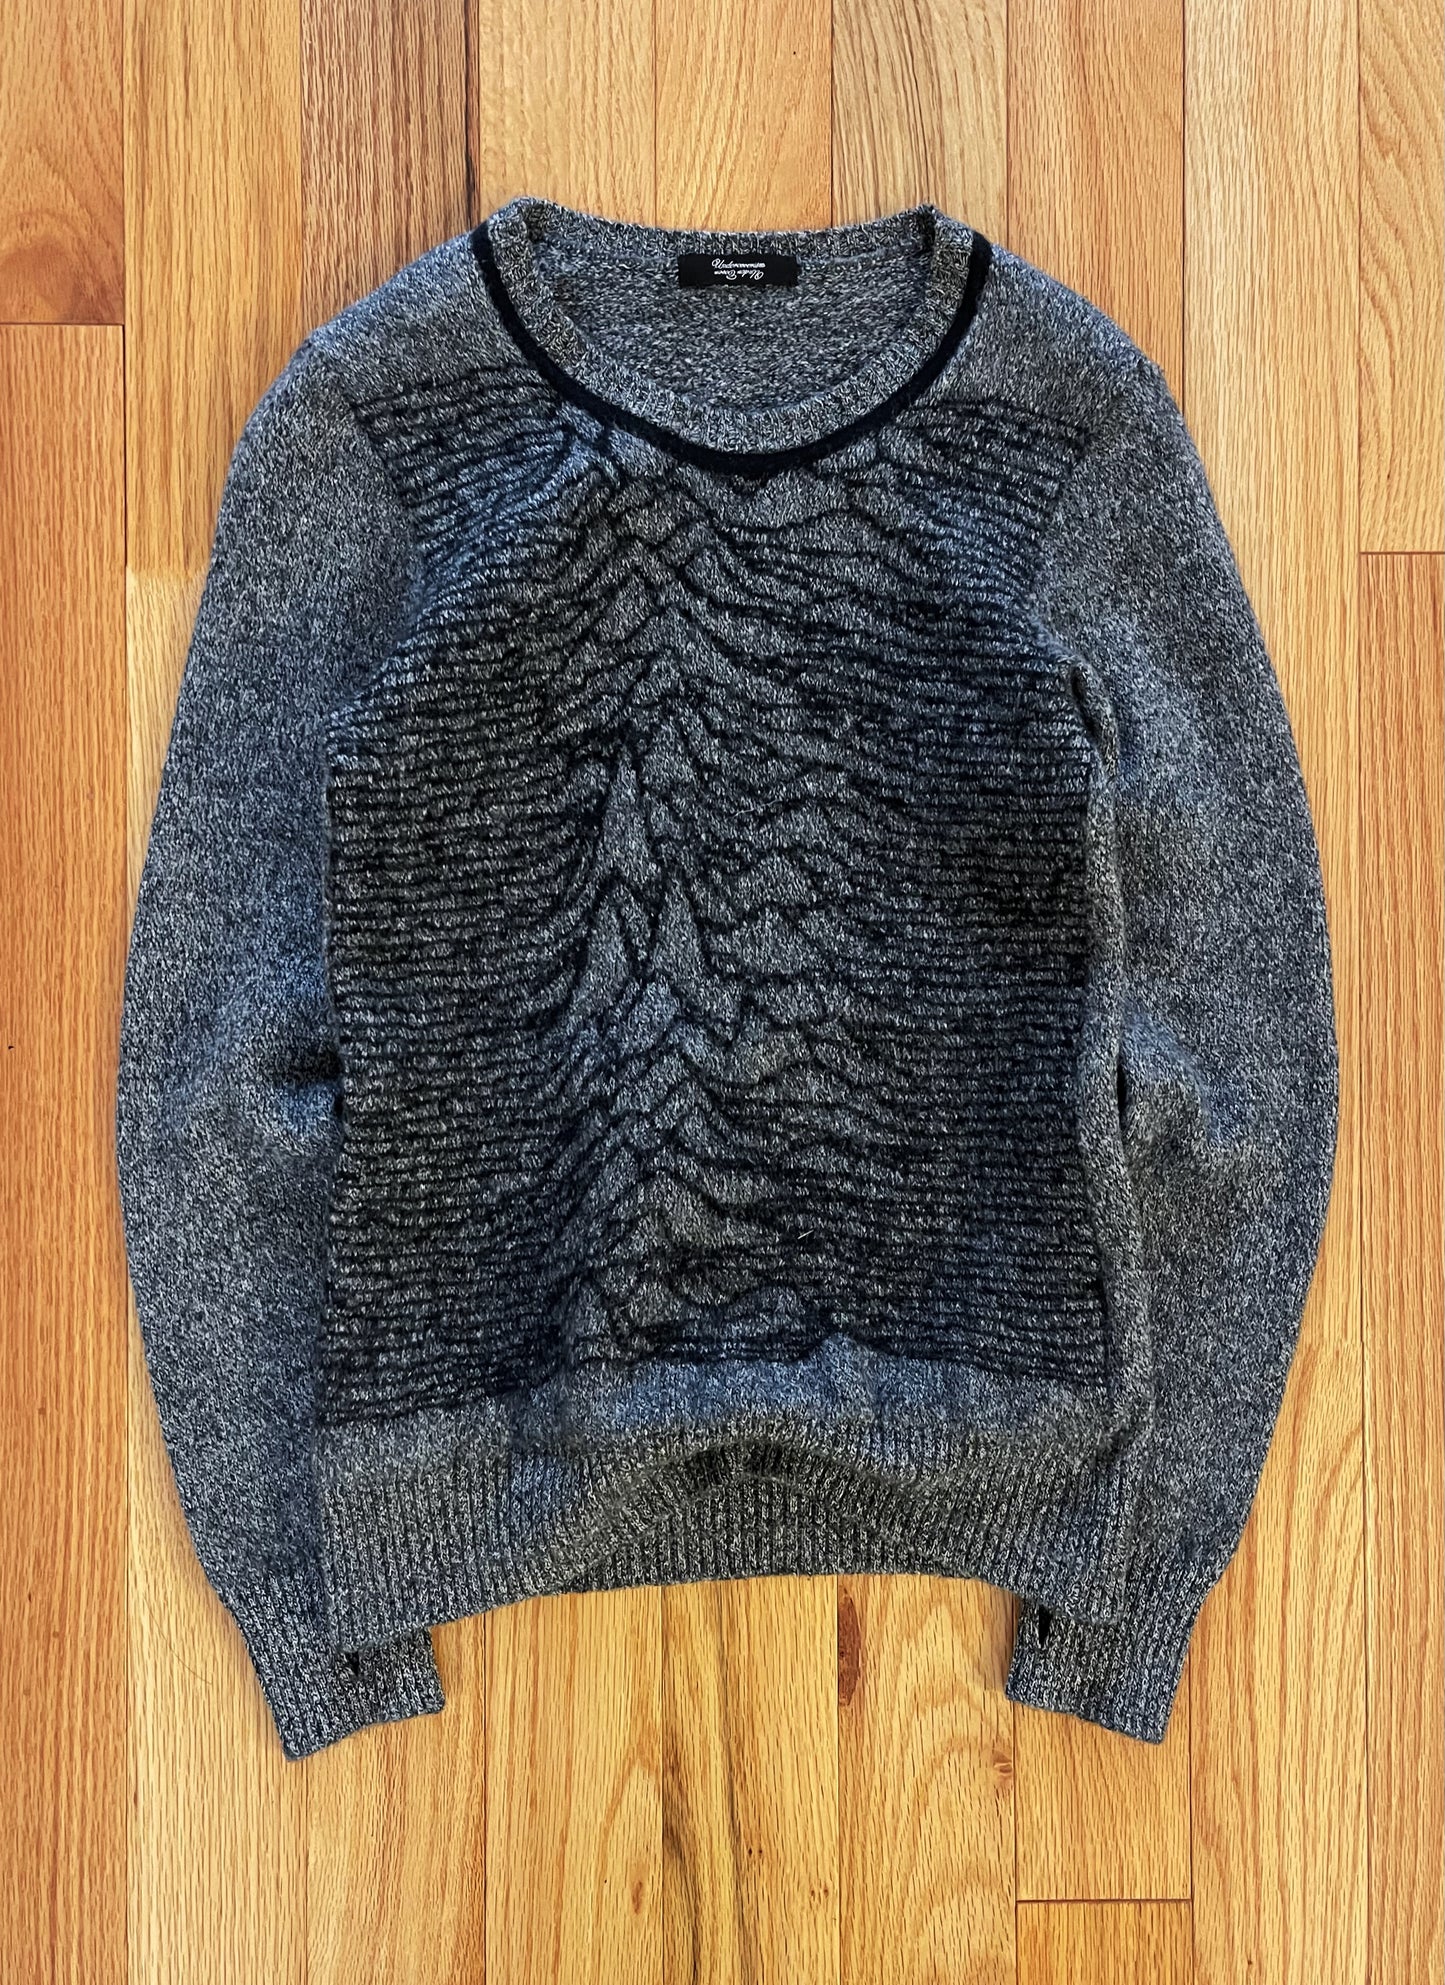 AW2009 Undercover Joy Division Unknown Pleasure Knit Sweater